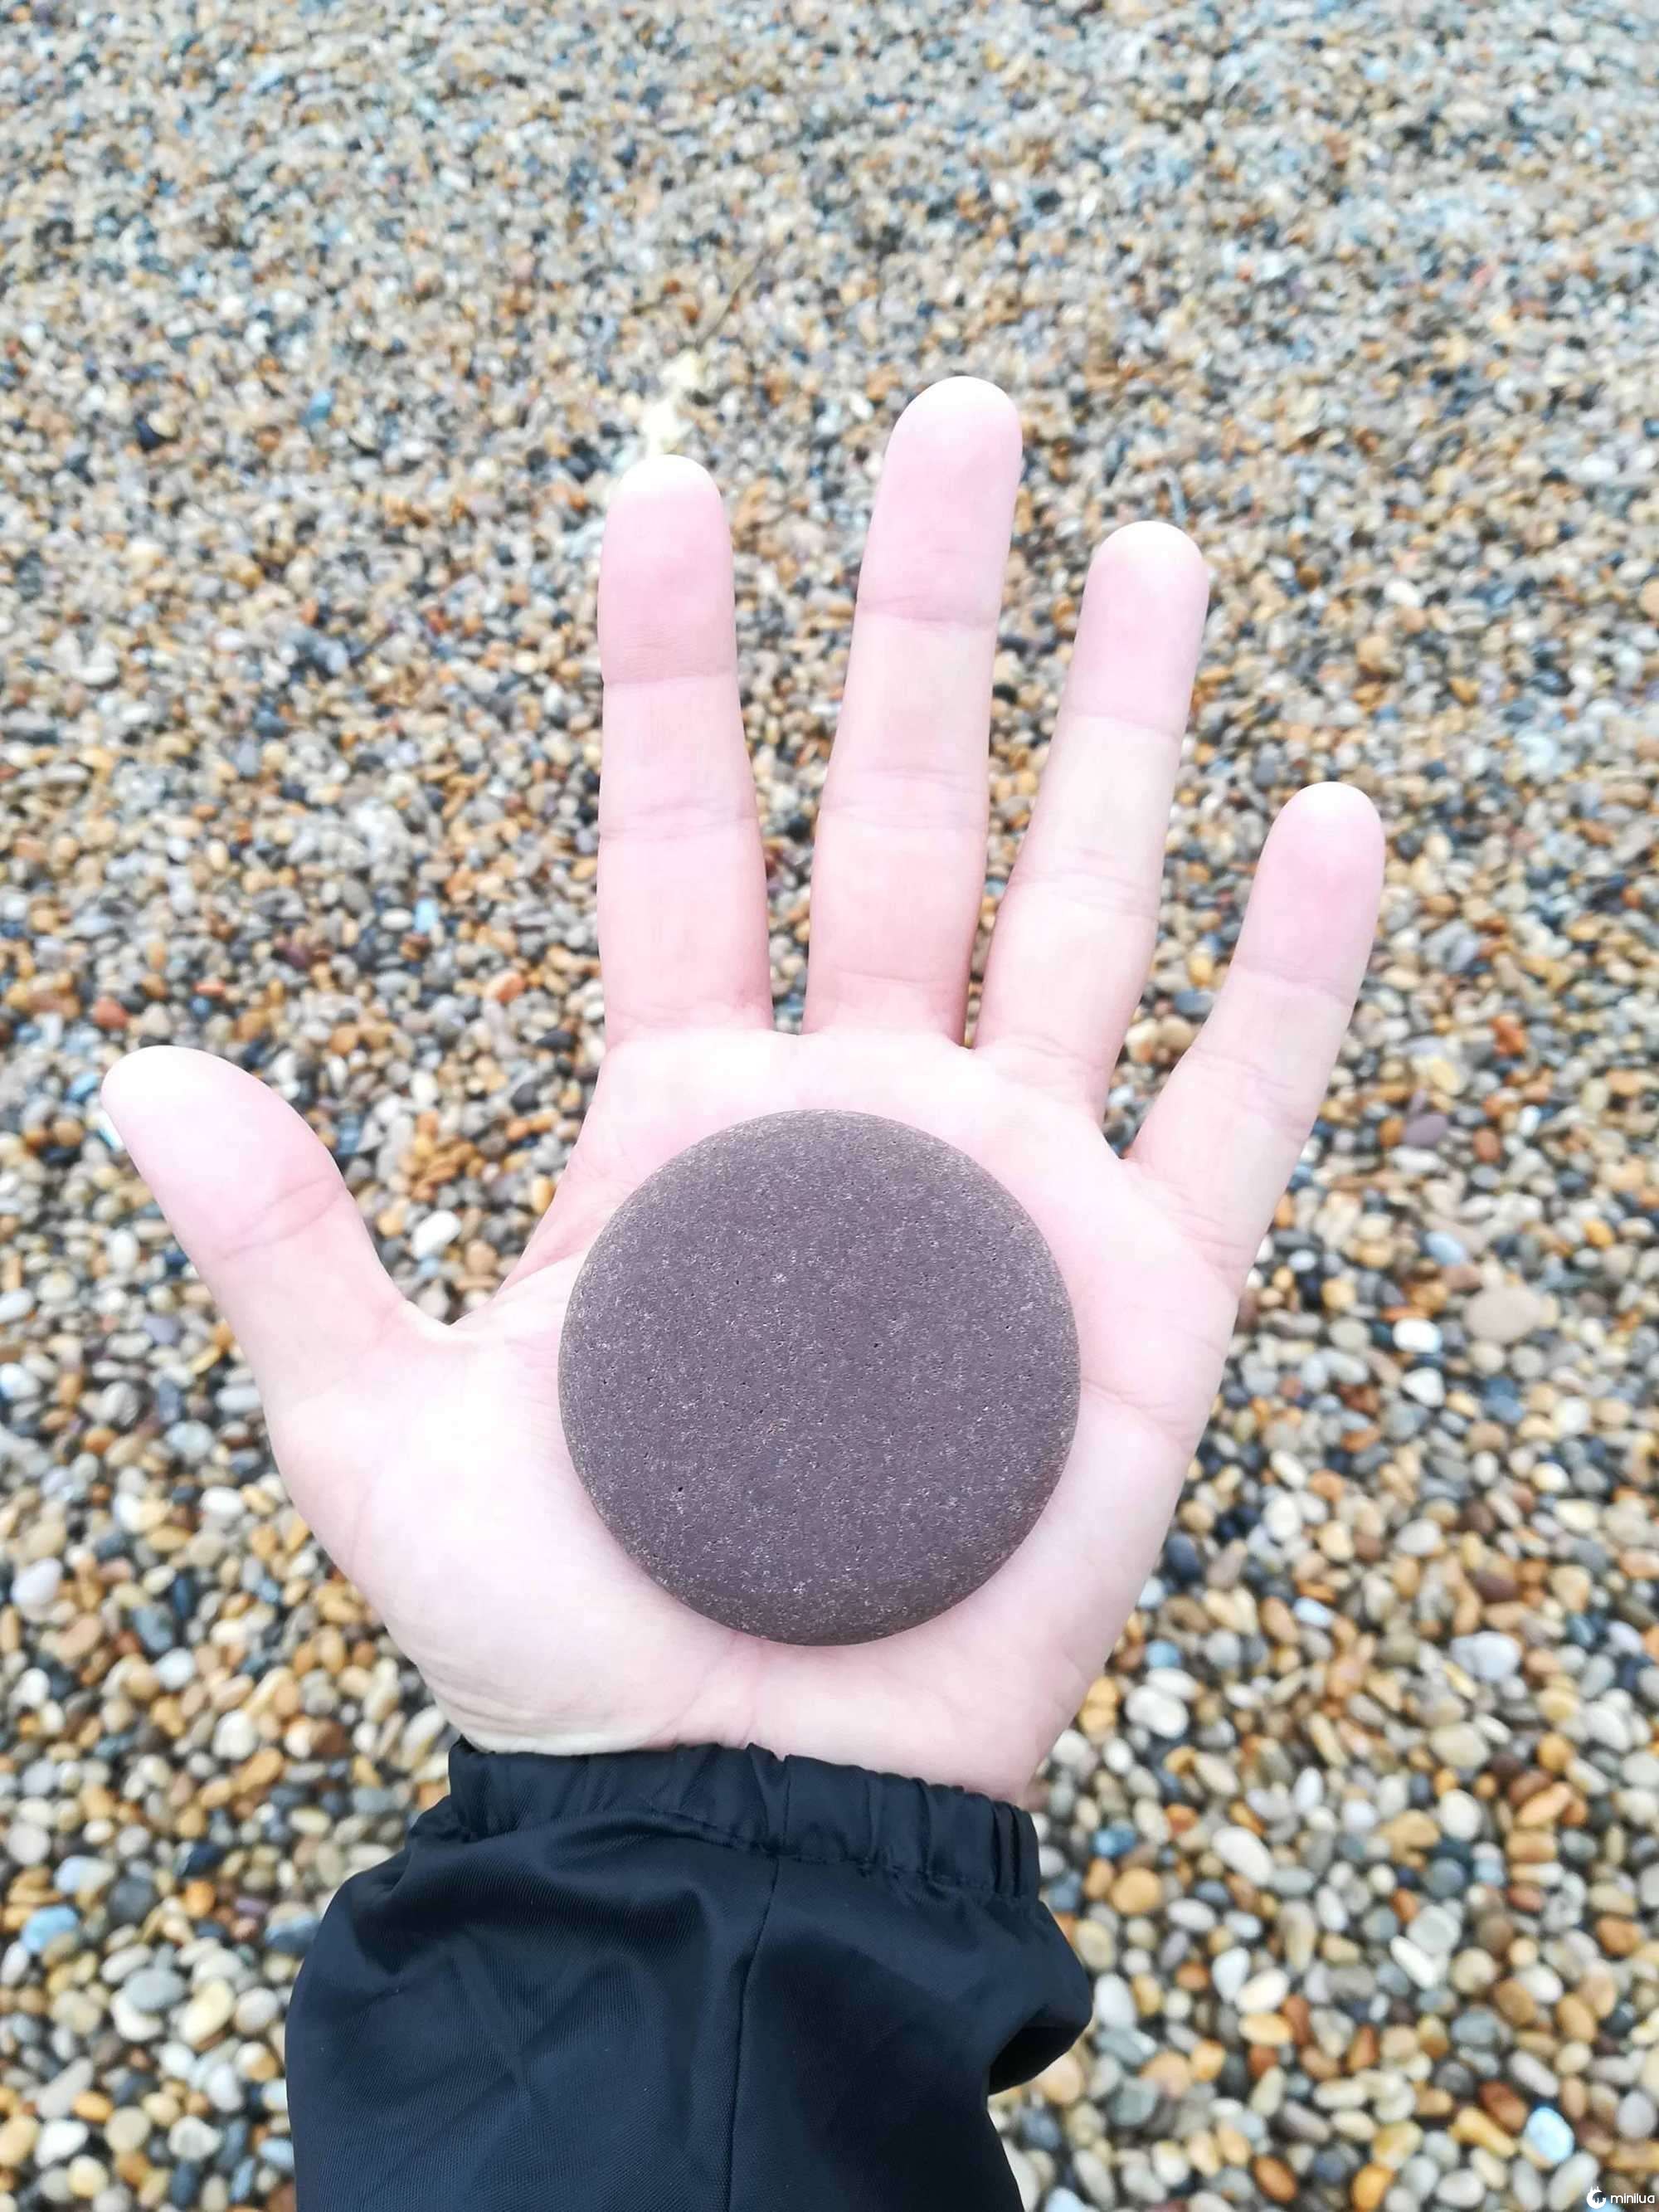 Rocks have bumps and jagged edges, but this little pebble found at the beach looks absolutely perfect.